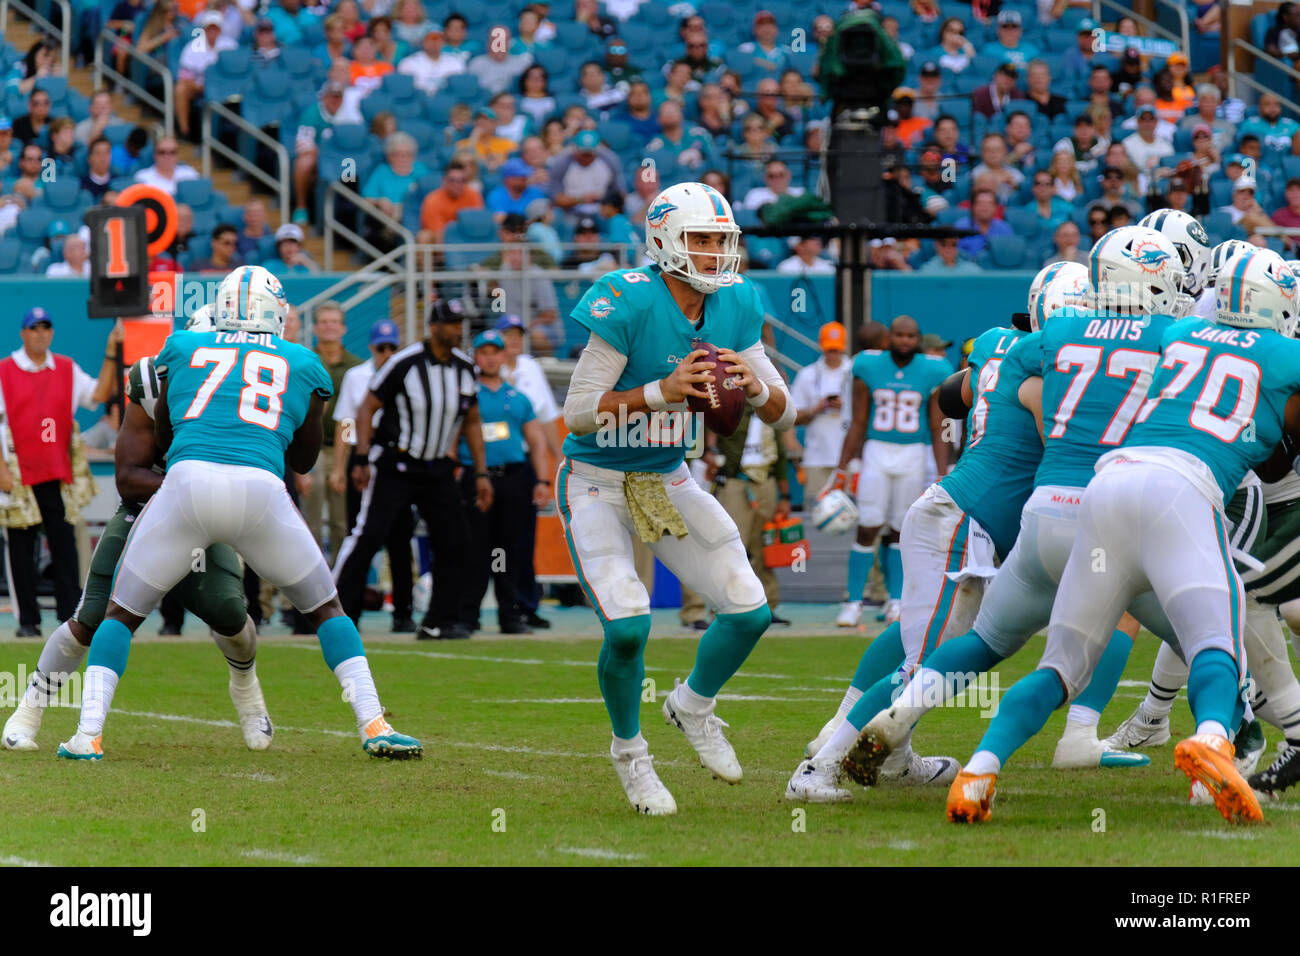 November 4, 2018: Brock Osweiler #8 of Miami during the NFL football game between the Miami Dolphins and New York Jets at Hard Rock Stadium in Miami Gardens FL. The Dolphins defeated the Jets 13-6. Stock Photo